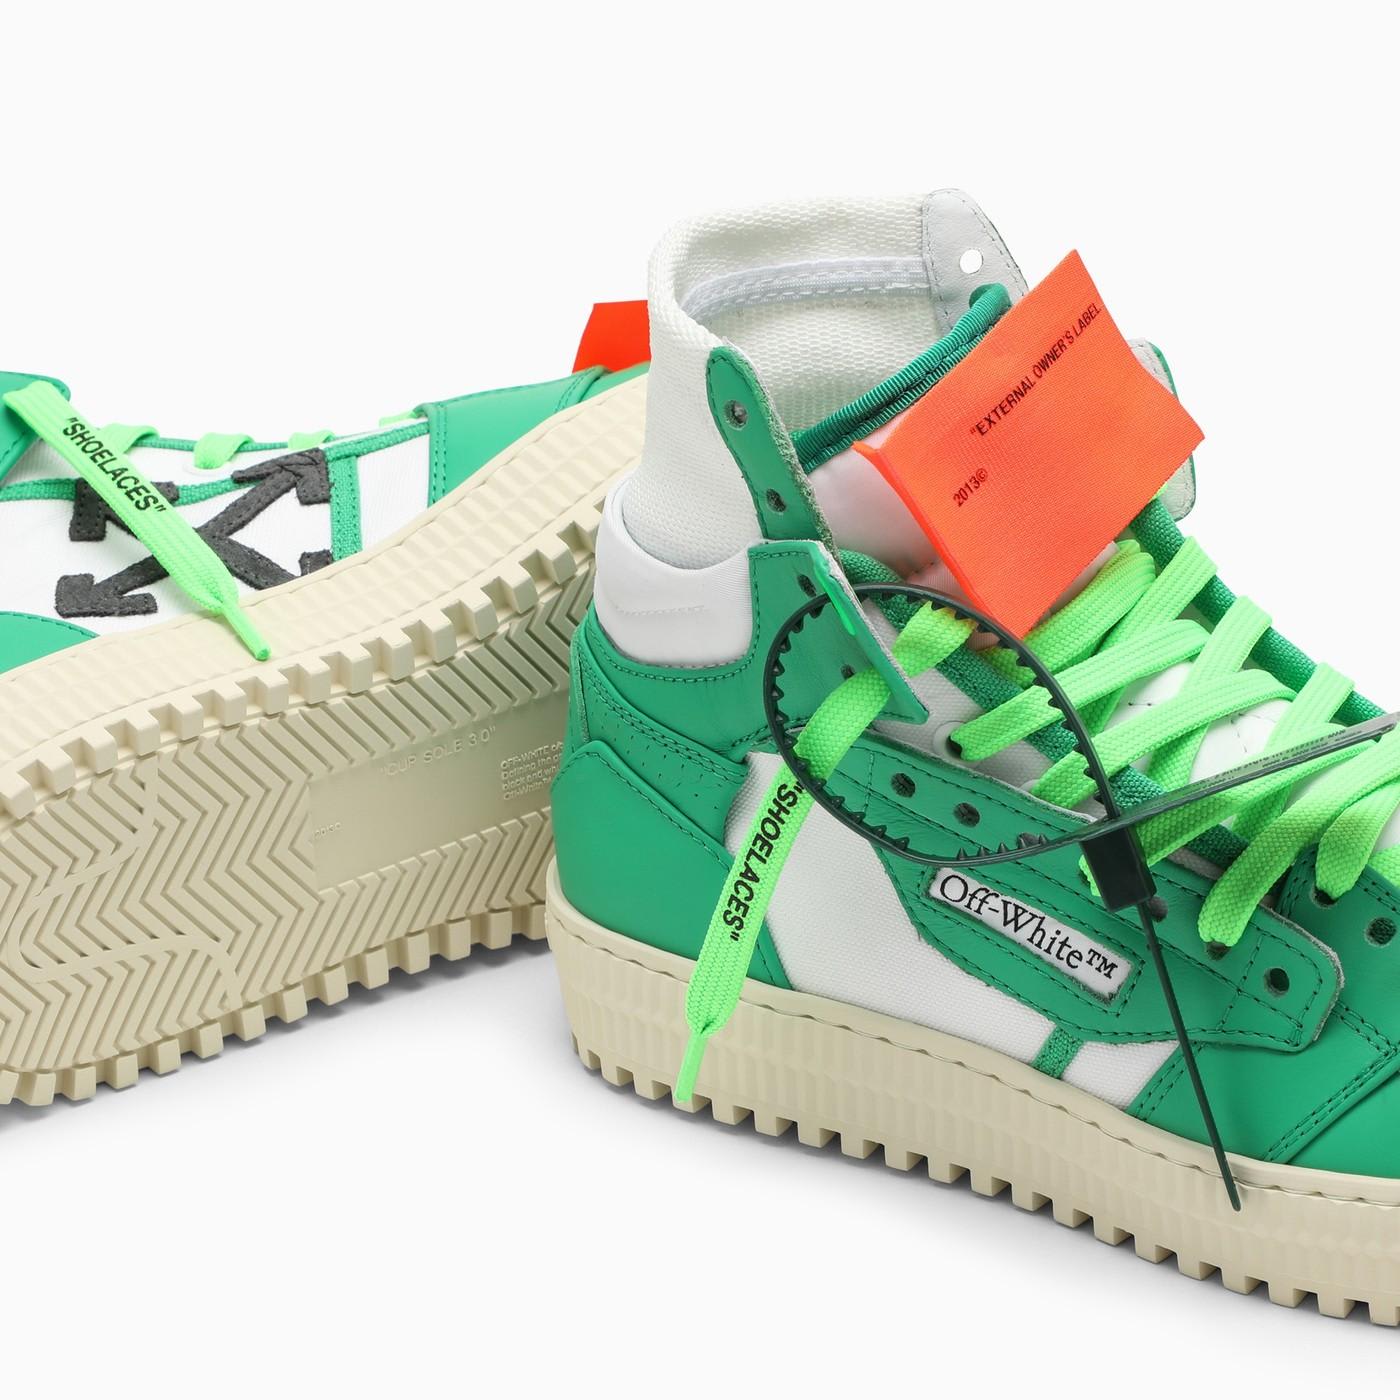 Virgil Abloh Personally Teases New Off-White™ 3.0 “Off-Court Lows”